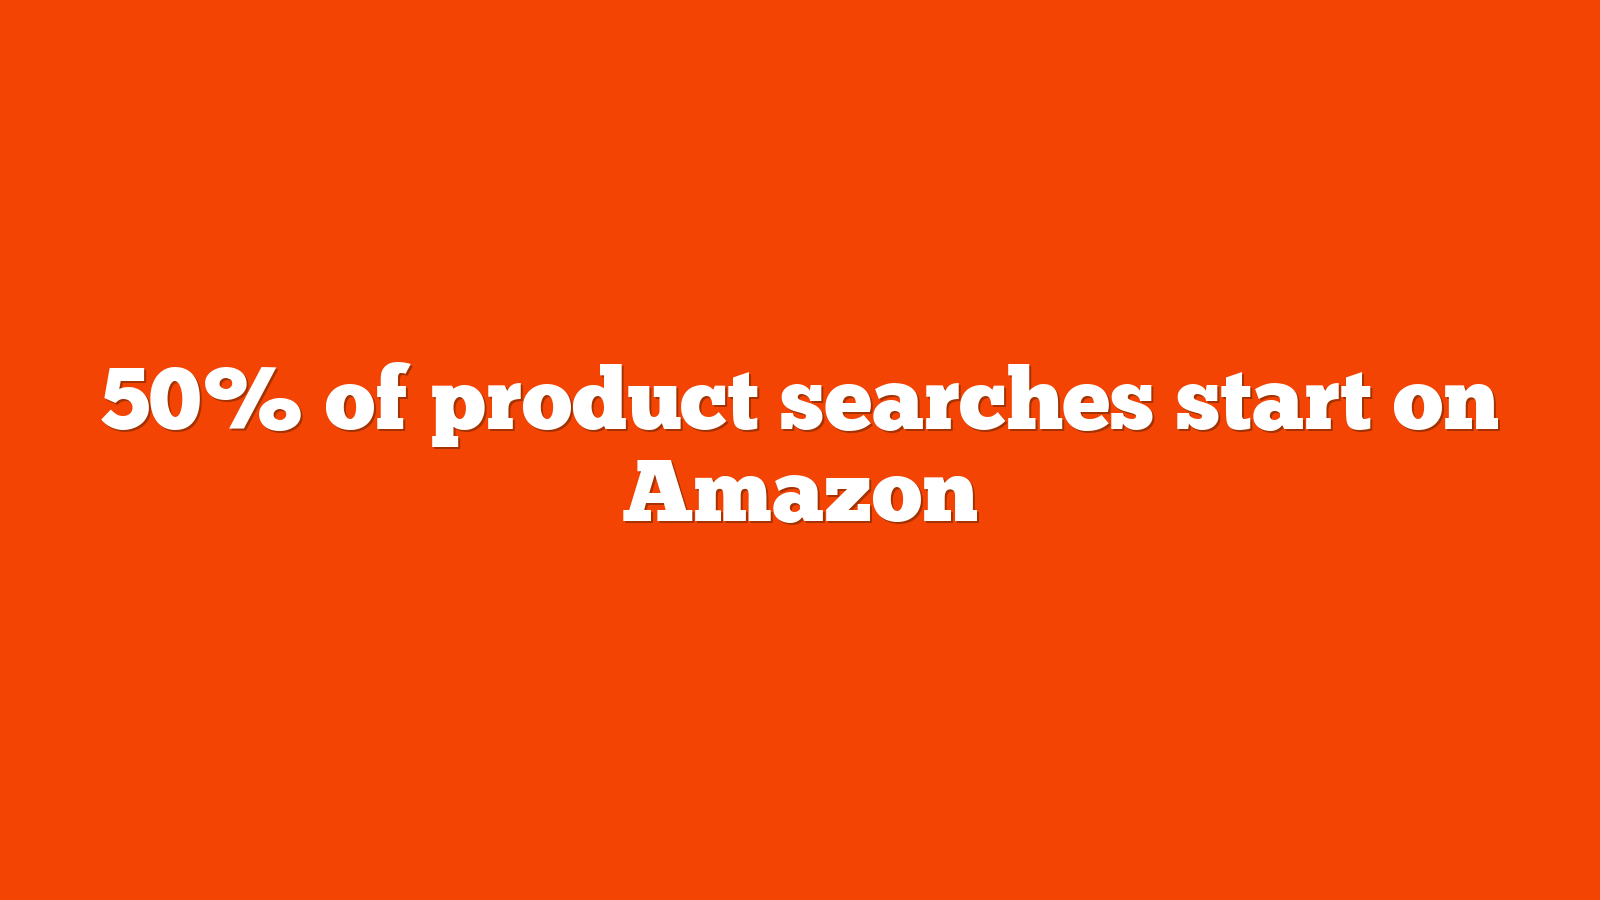 50% of product searches start on Amazon